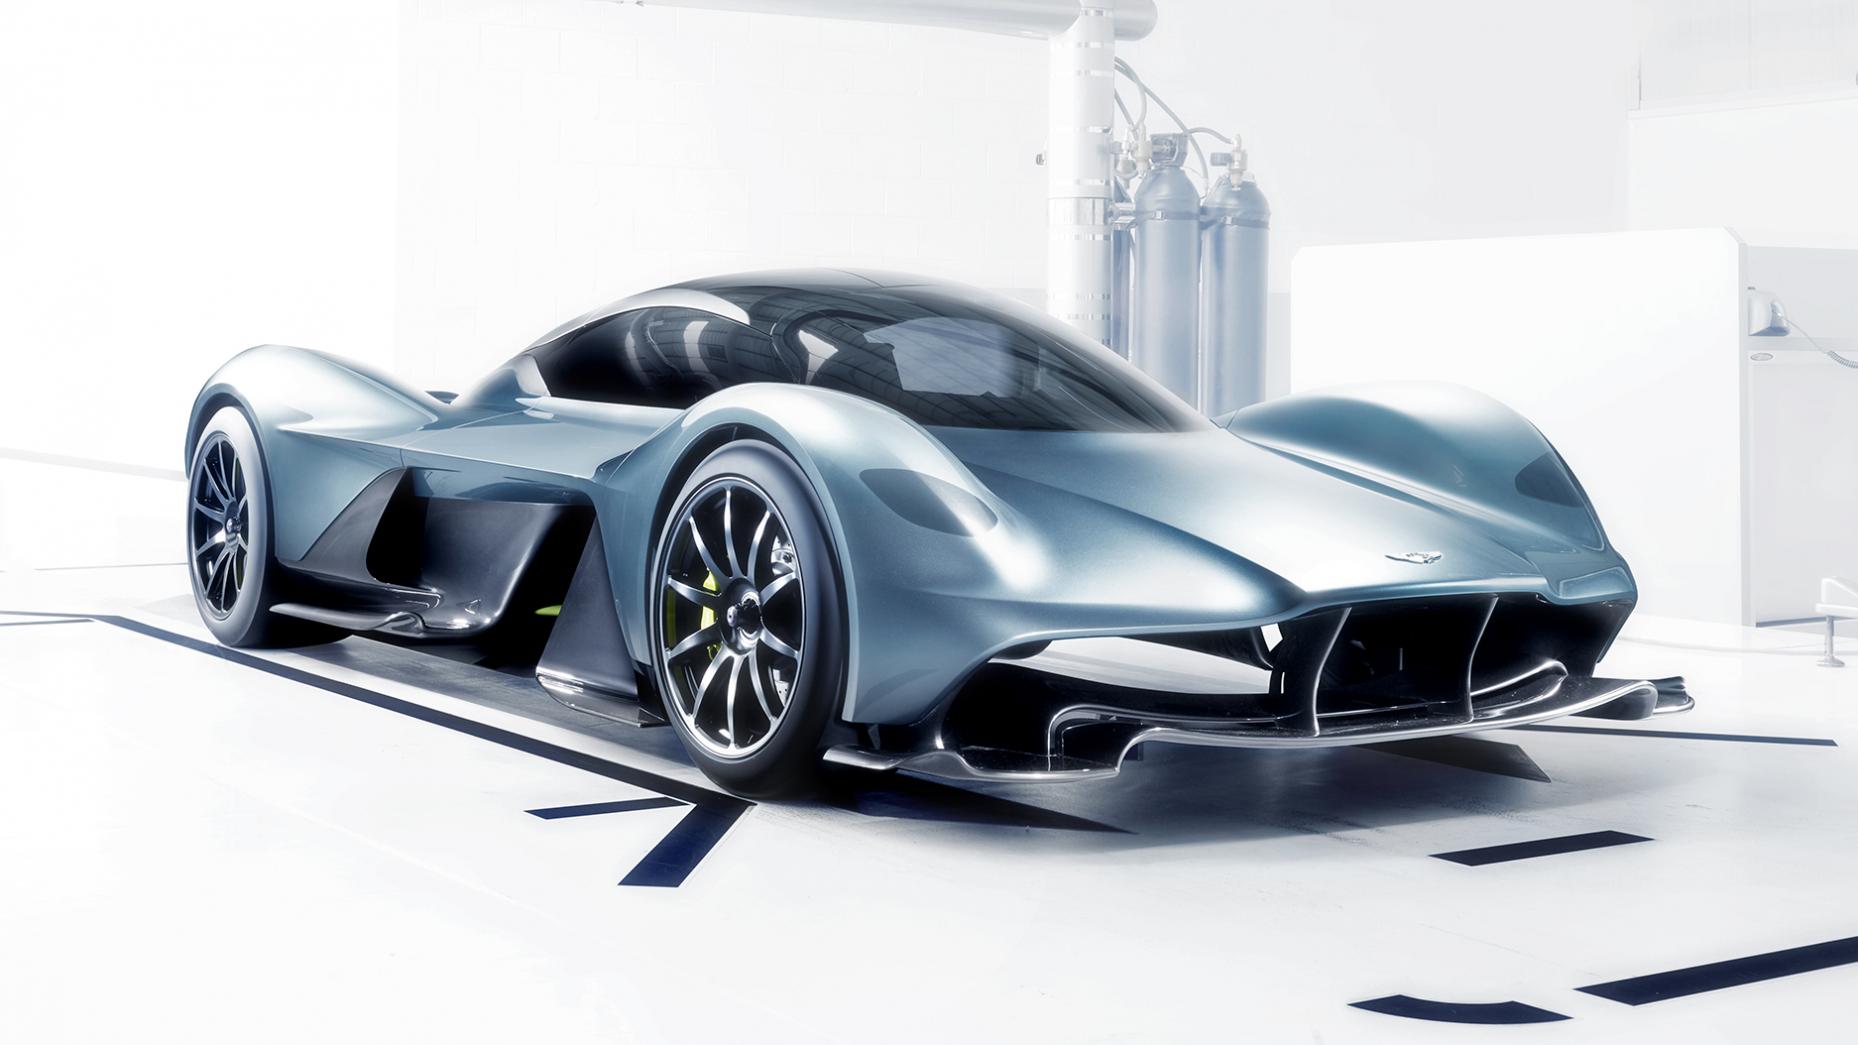 Stop what you’re doing: New £2m hypercar from Aston Martin unveiled